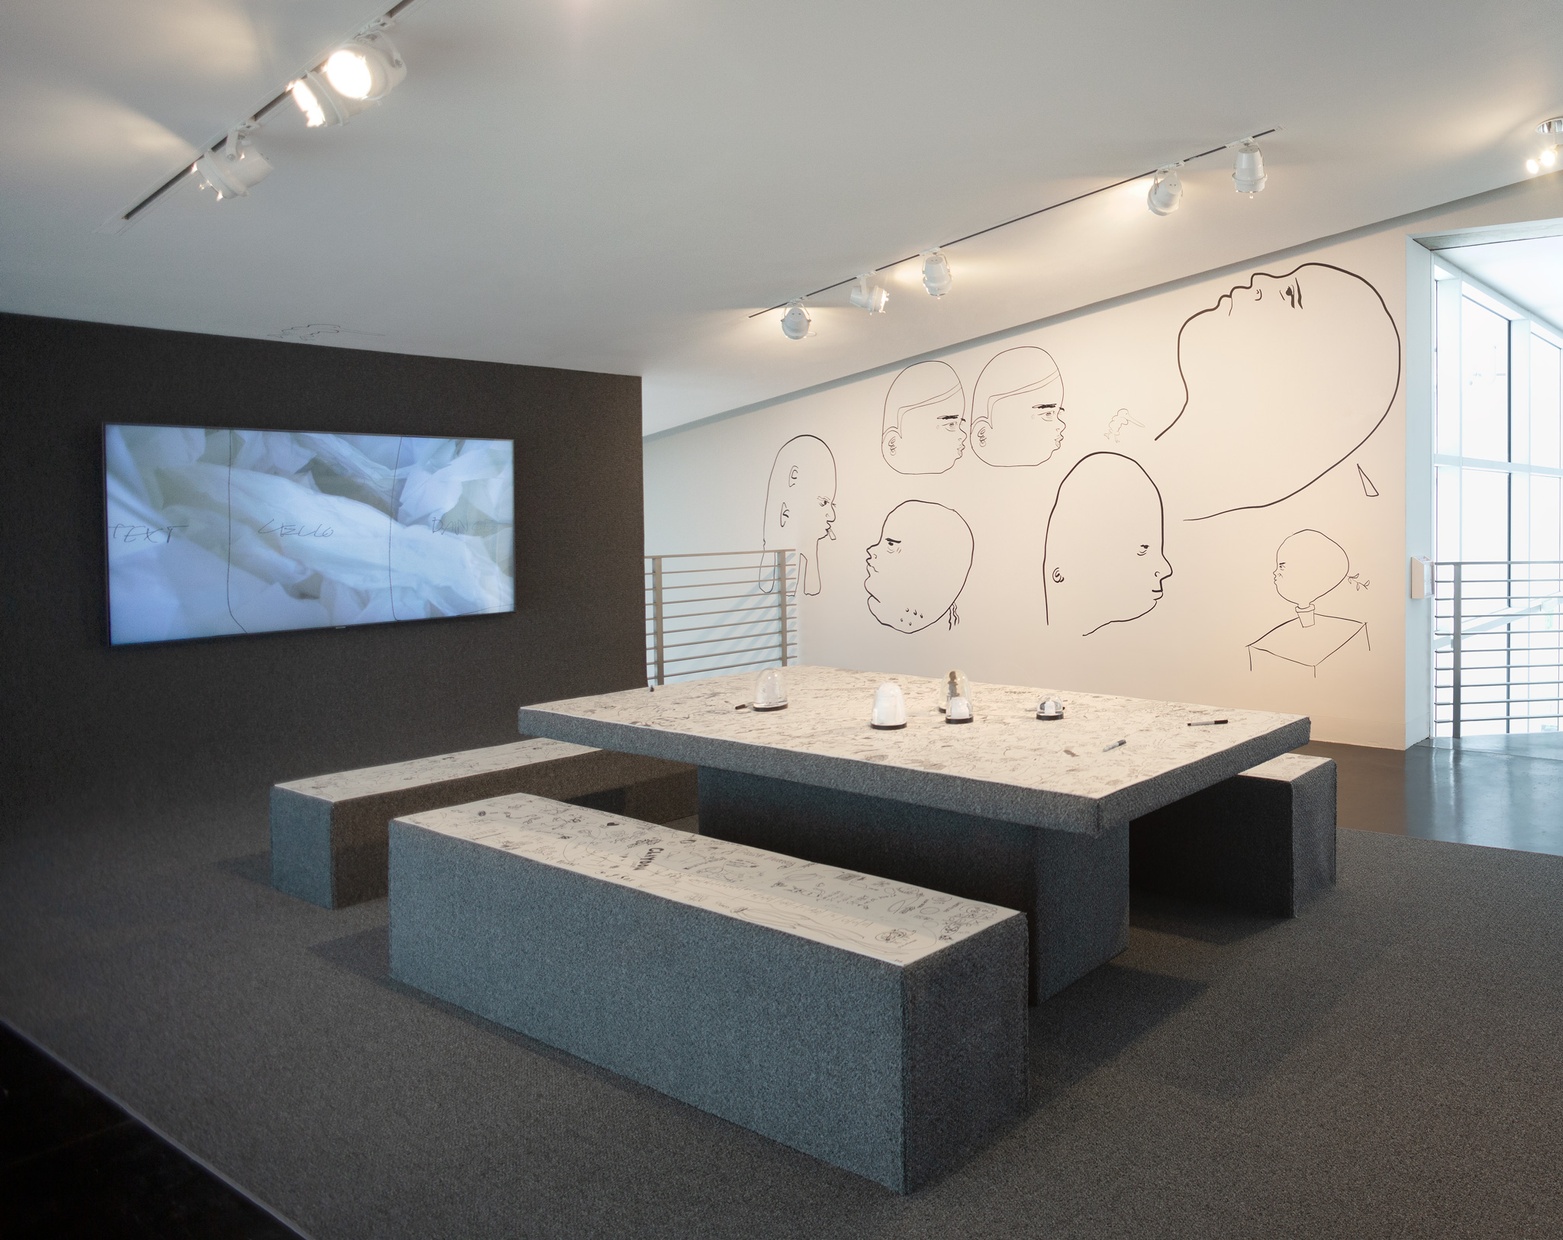 A small gallery features a carpeted wall, seating, and floors, all topped with a white board, one white wall with black line drawings, and a video playing on the carpeted wall.